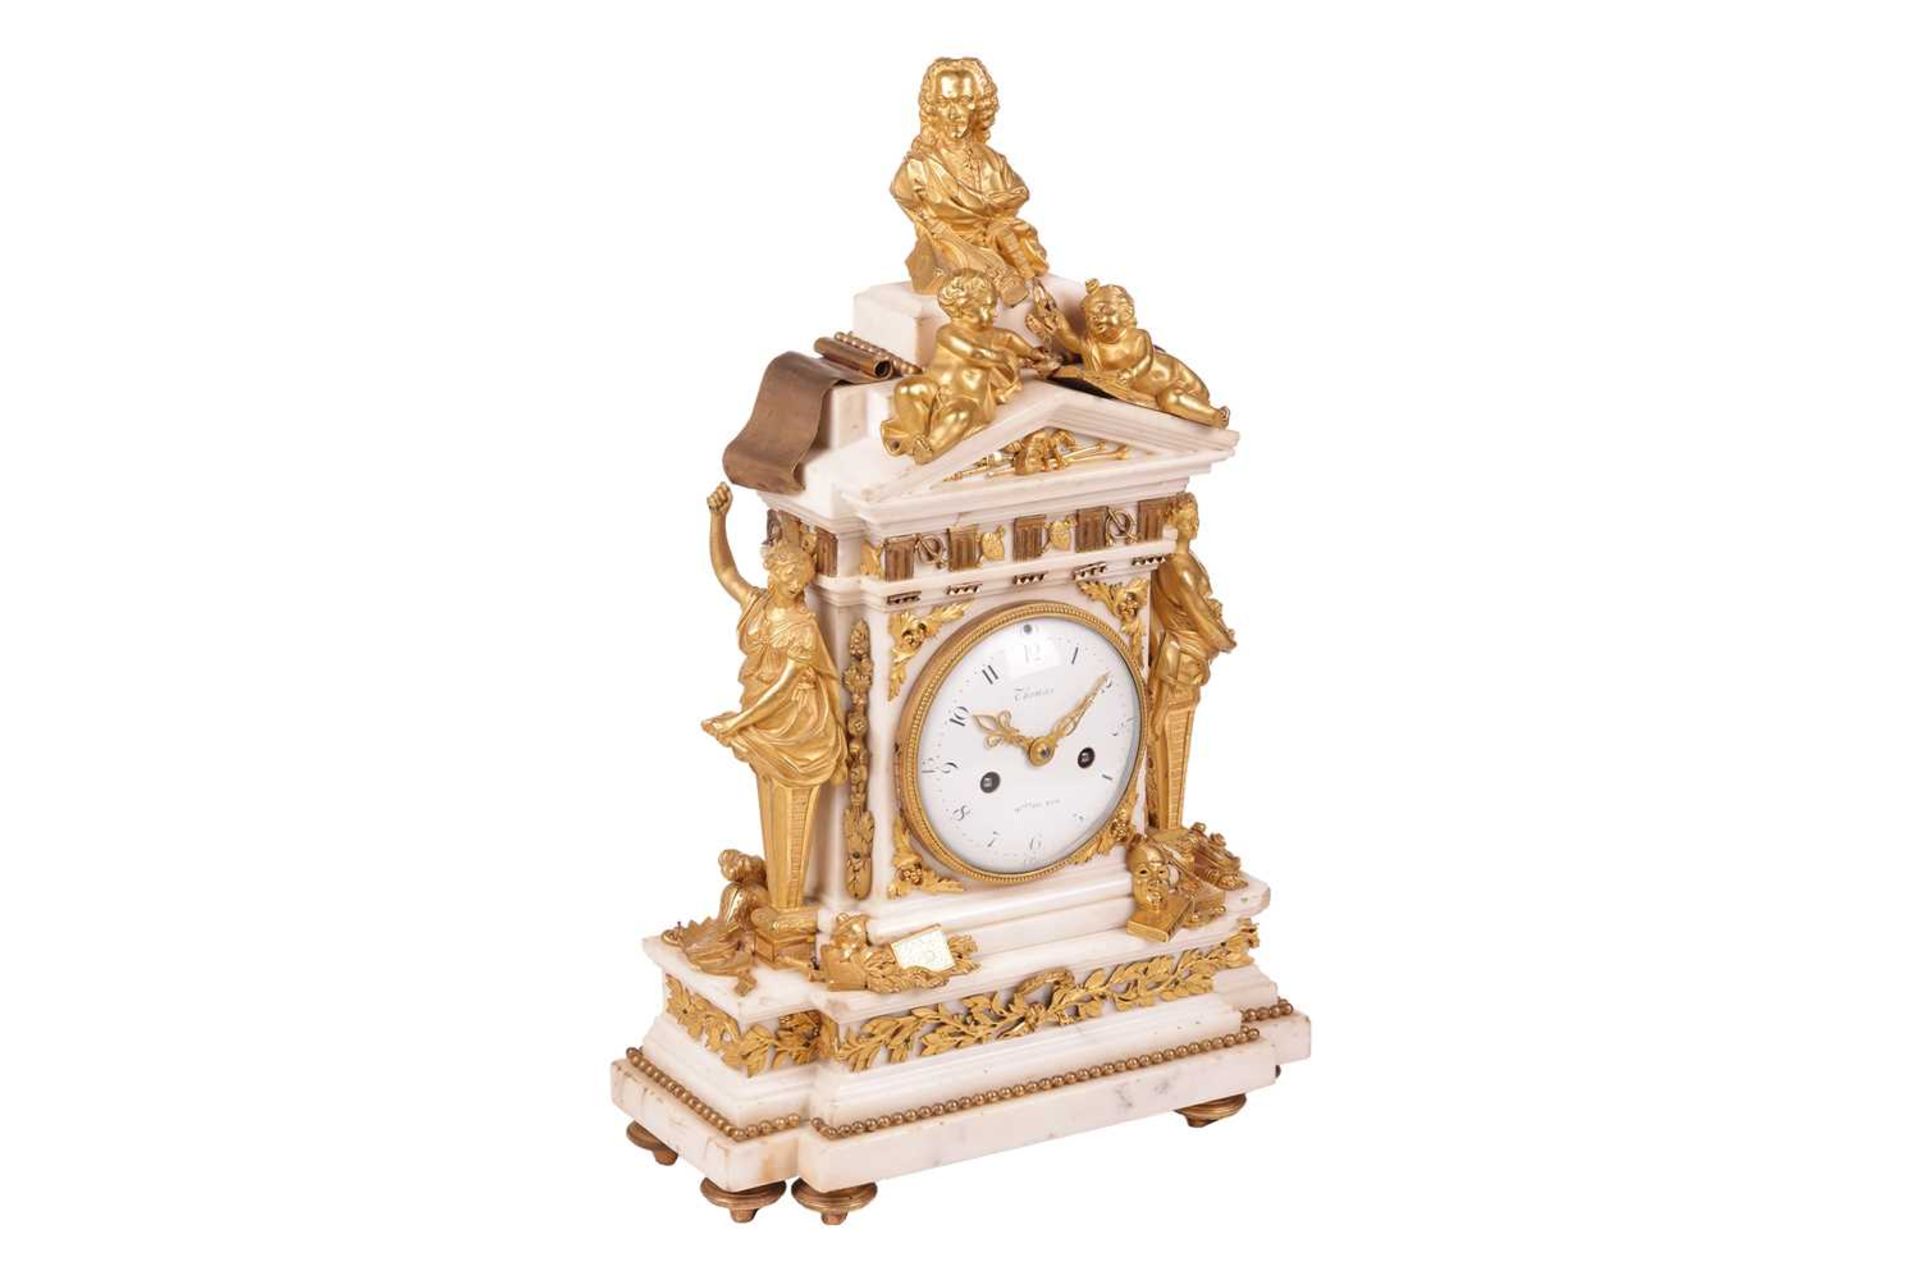 A large and ornate Louis XVI French marble and ormolu-mounted figural mantle clock, of architectural - Image 3 of 23